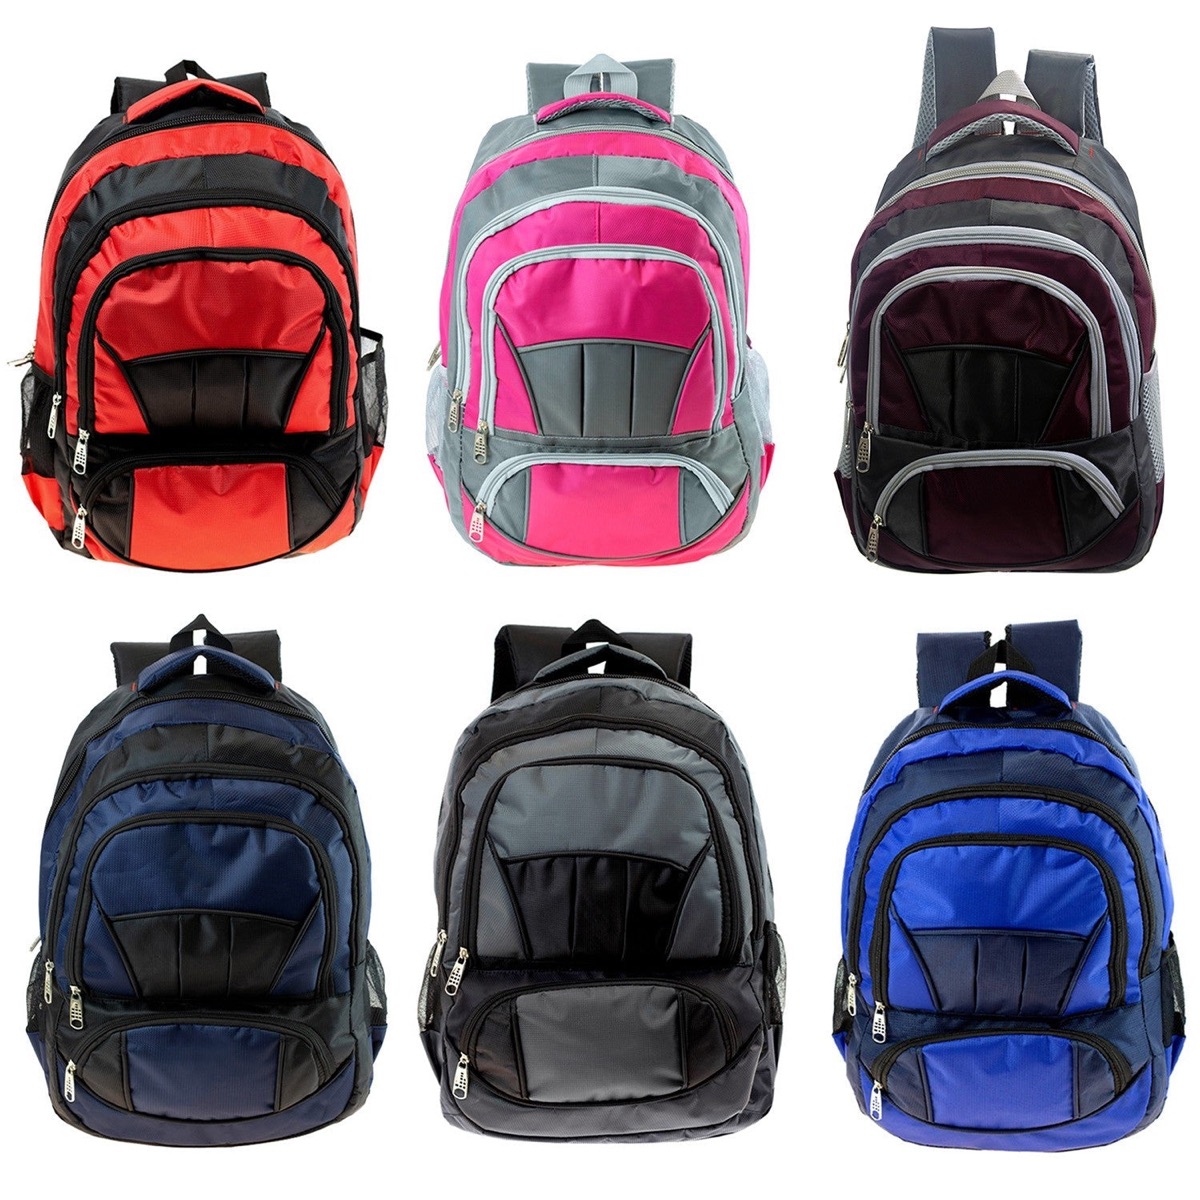 ''16'''' Premium Heavy Duty Two Tone BACKPACKs w/ Zip-Up Cargo Pockets - Assorted Colors''